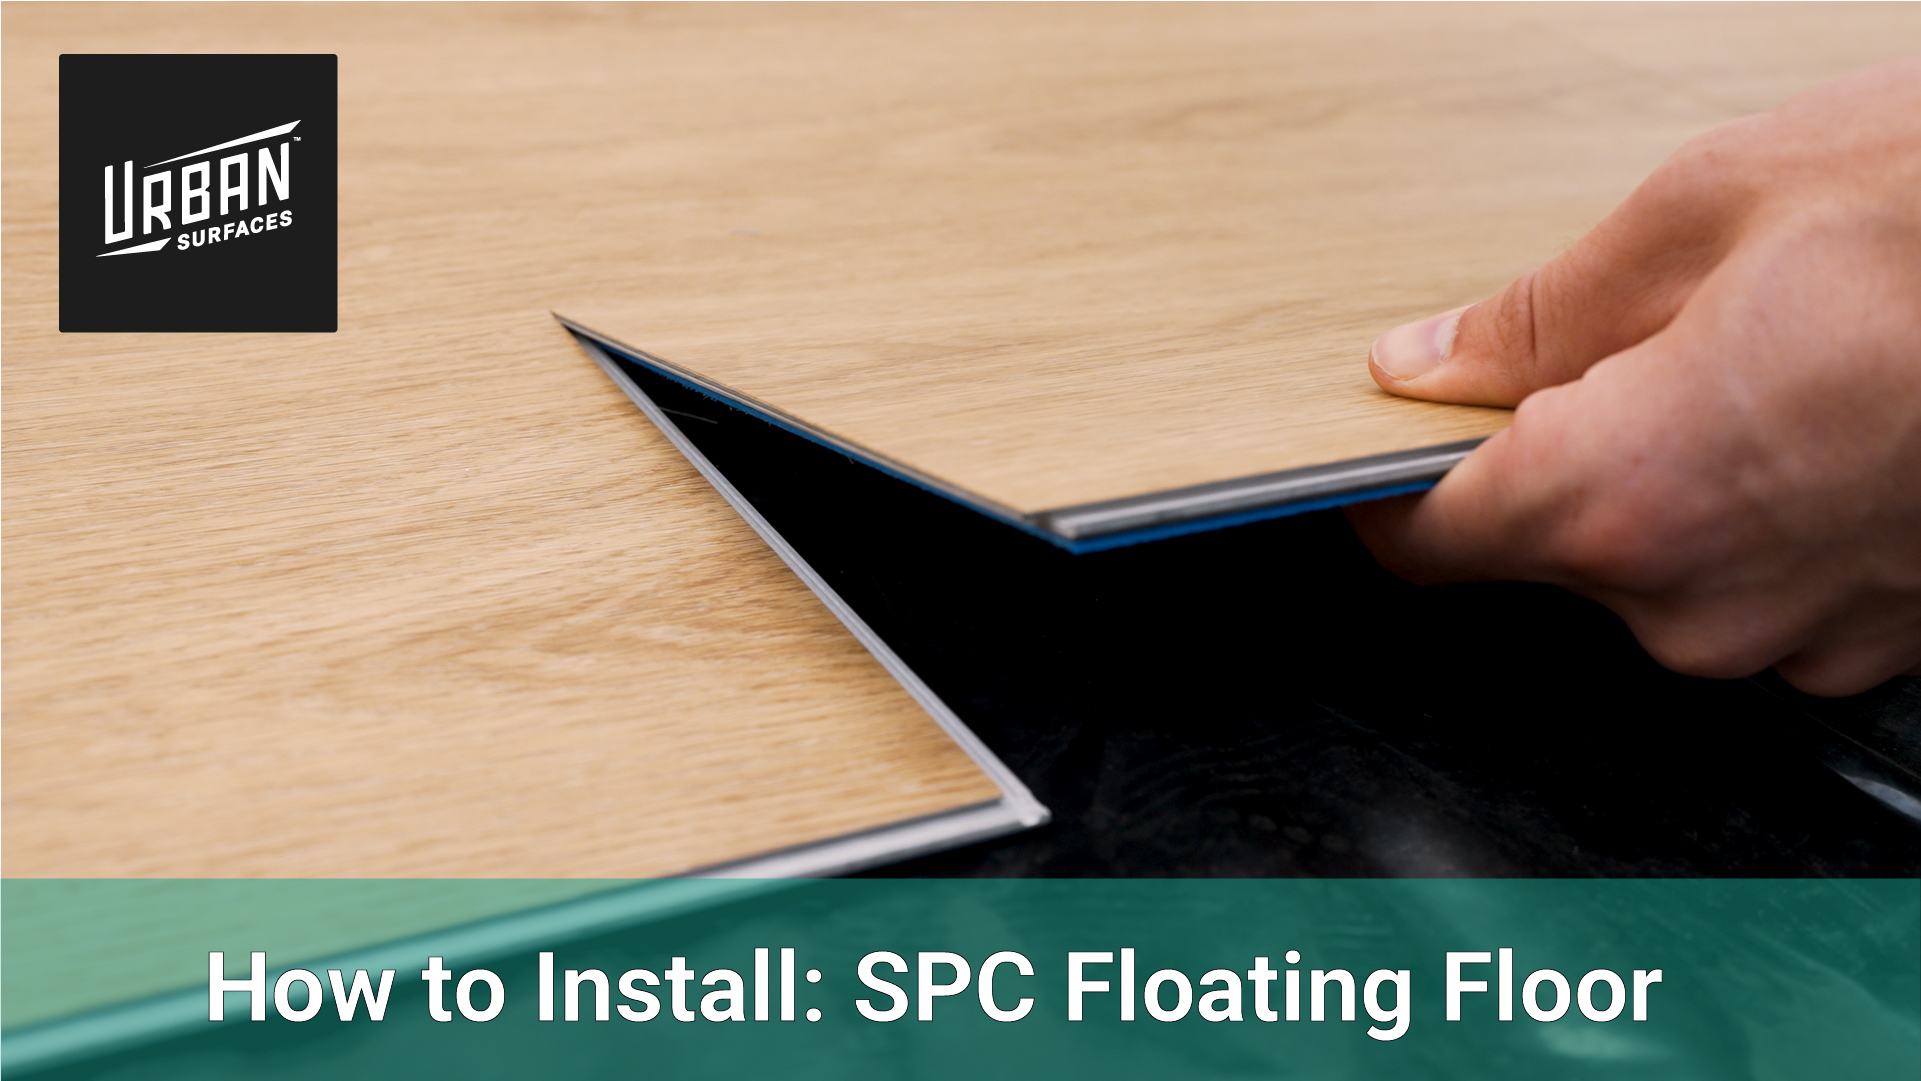 How To Install: SPC Floating Floor